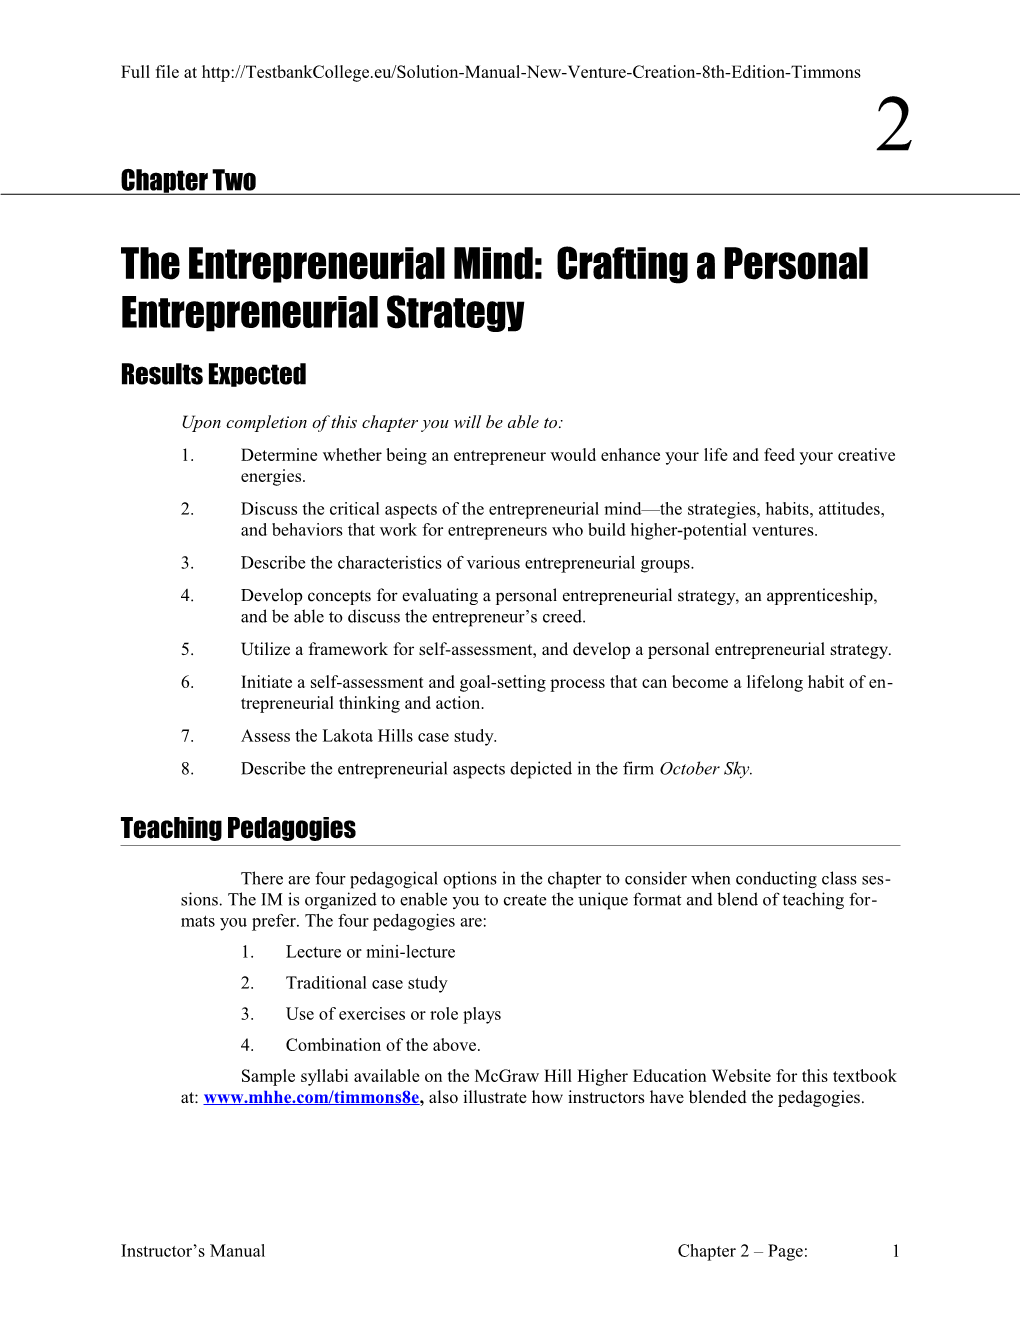 The Entrepreneurial Mind: Crafting a Personal Entrepreneurial Strategy